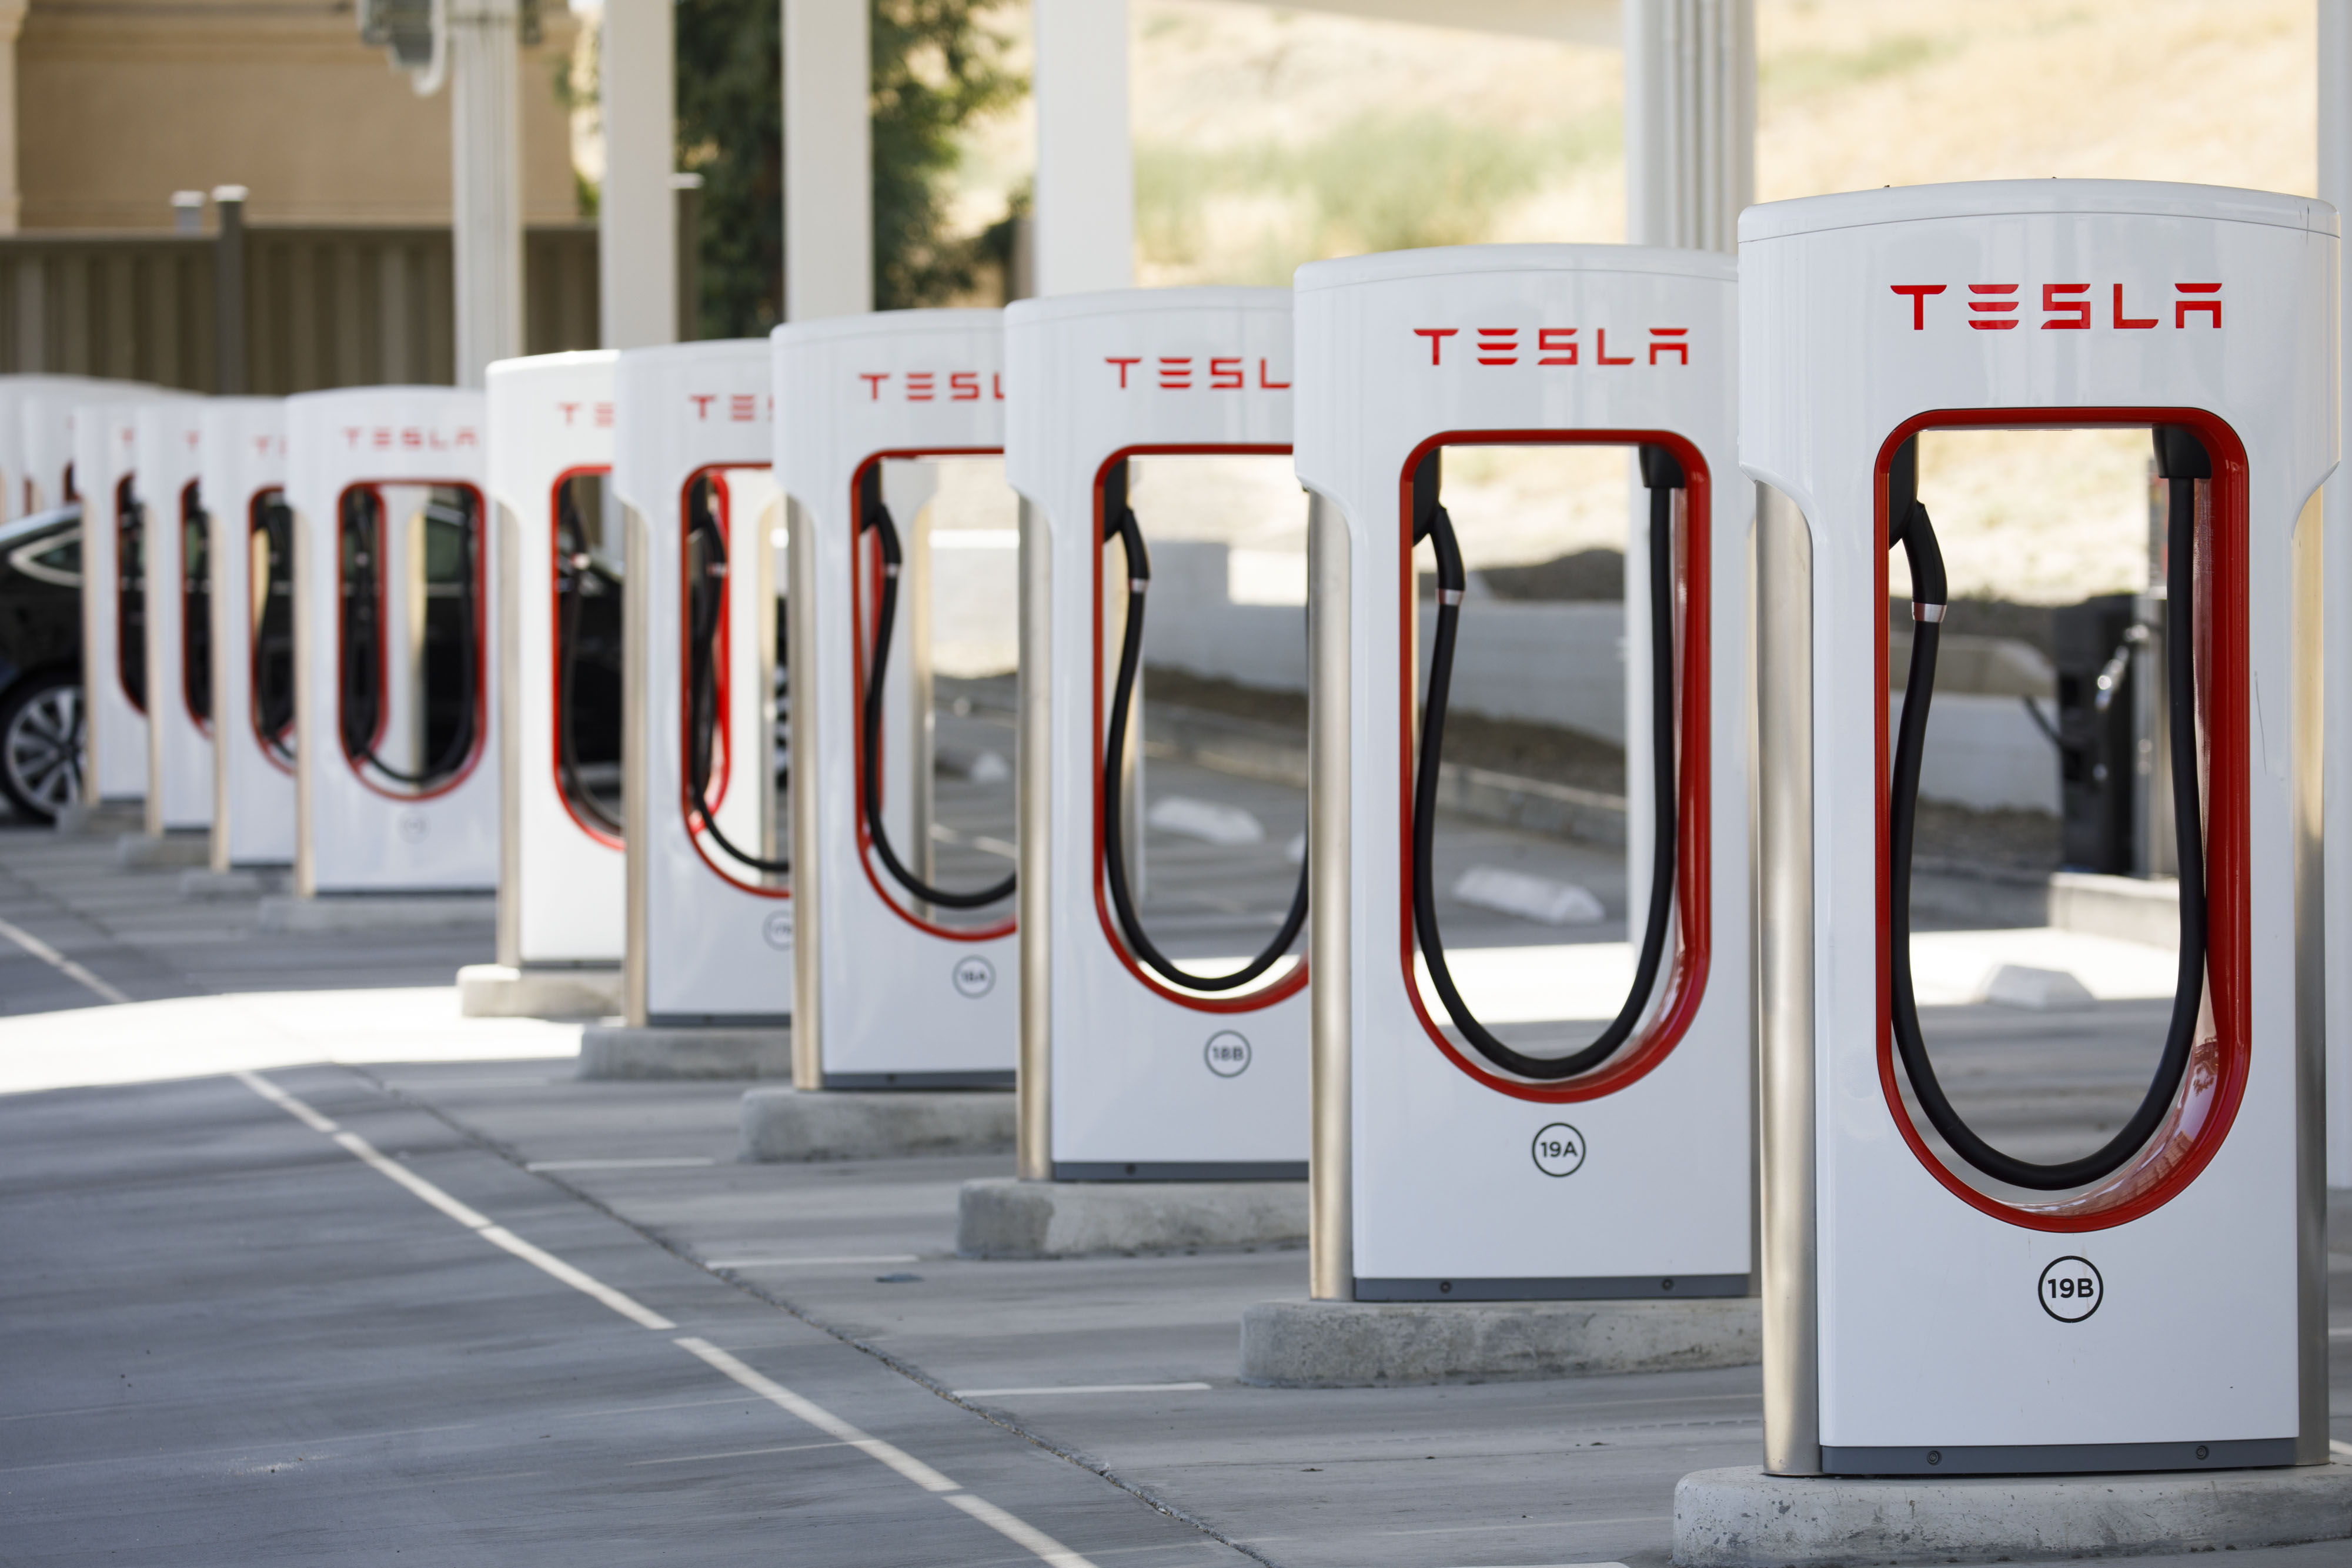 Electric vehicle charging stations stand at the Tesla Inc. Supercharger station.